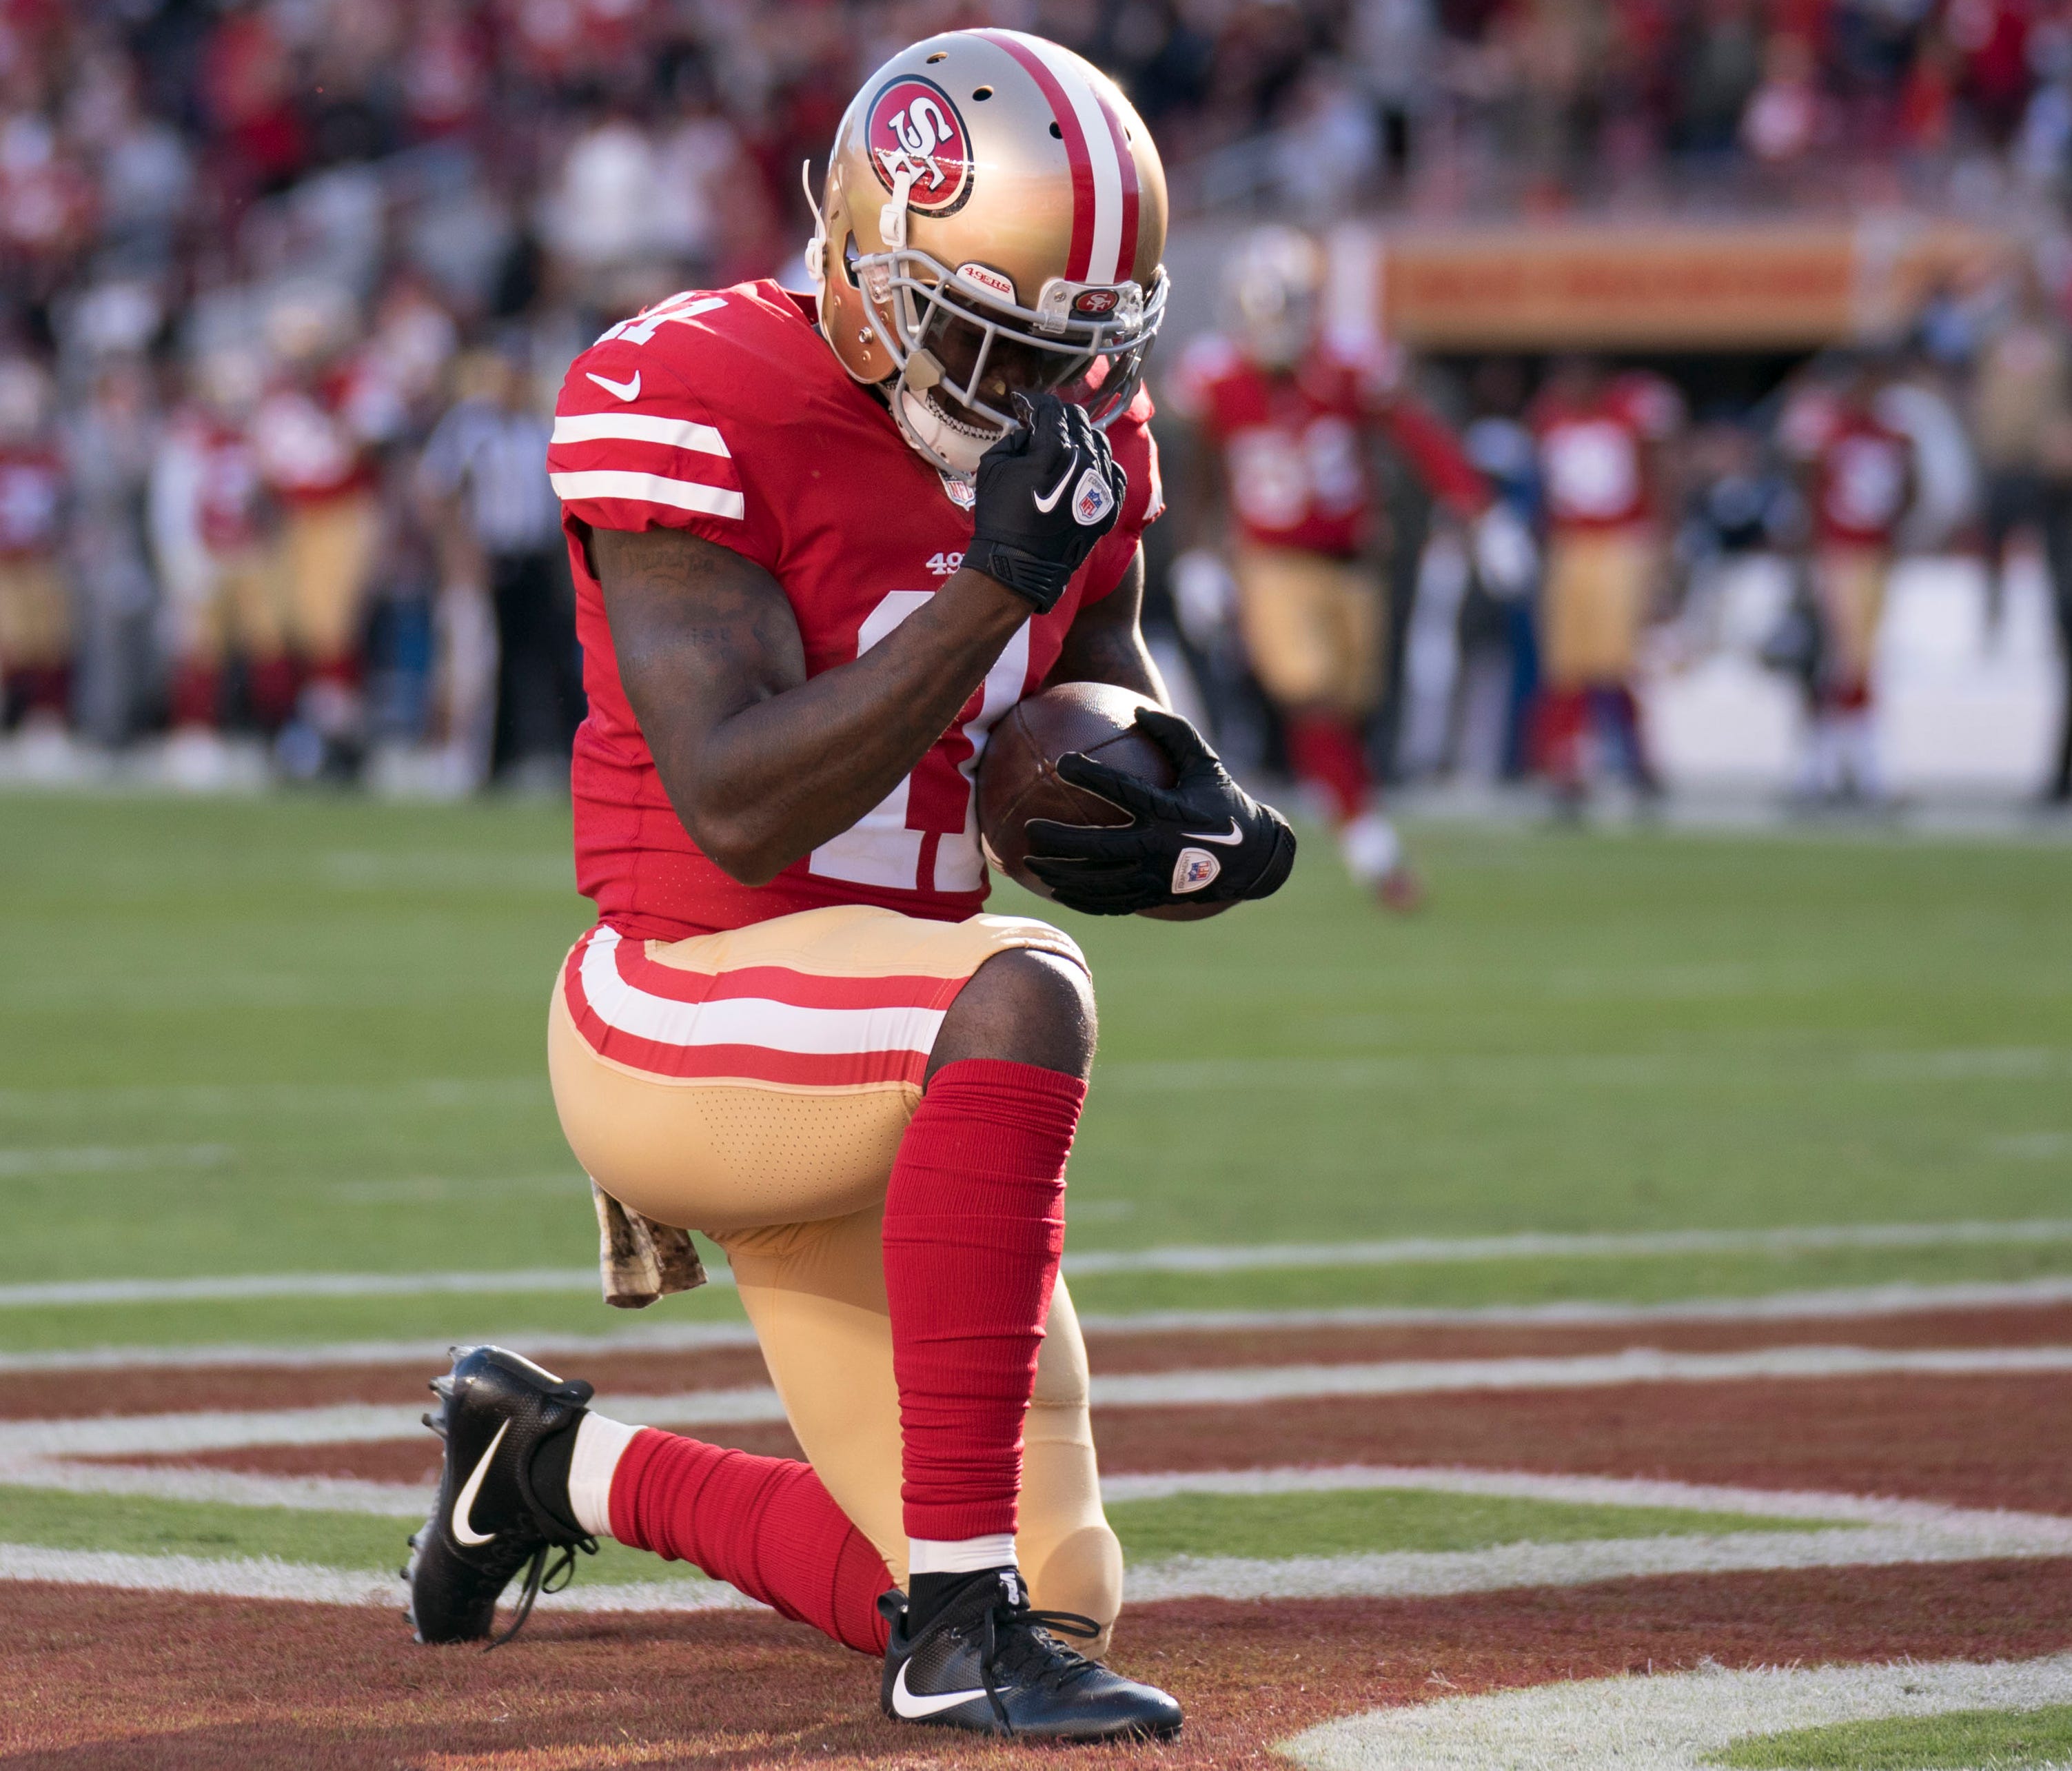 San Francisco 49ers wide receiver Marquise Goodwin (11) celebrates after scoring a touchdown against the New York Giants during the second quarter at Levi's Stadium.